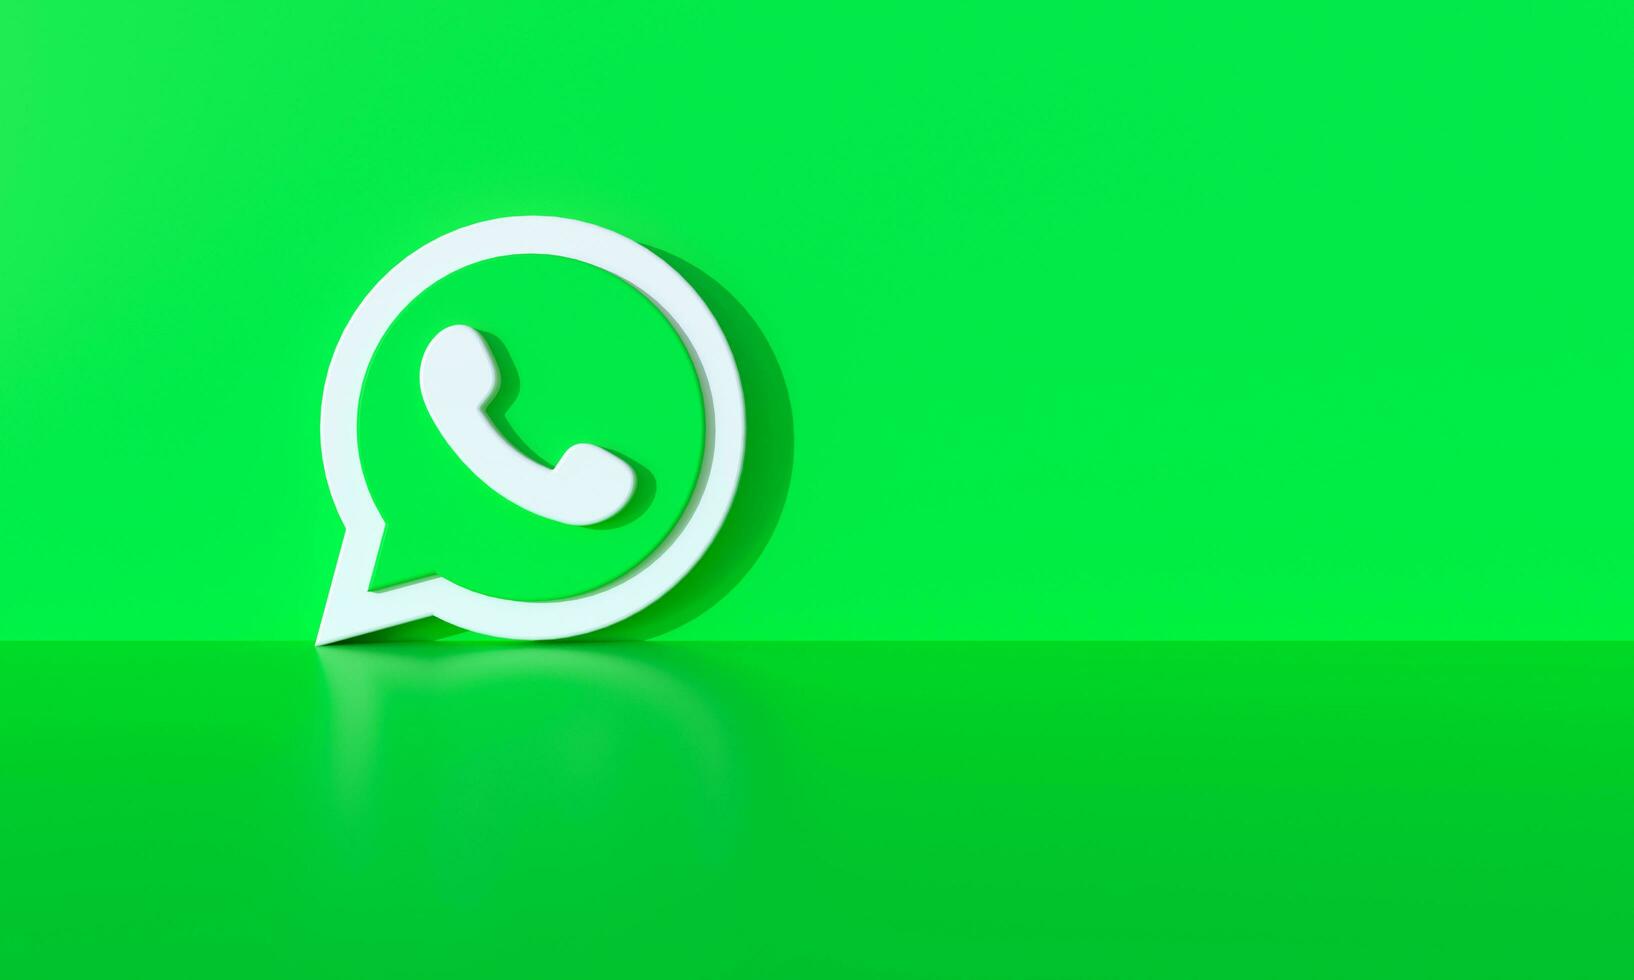 social media logo on the green wall background with hard shadow and space for text and graphics. photo